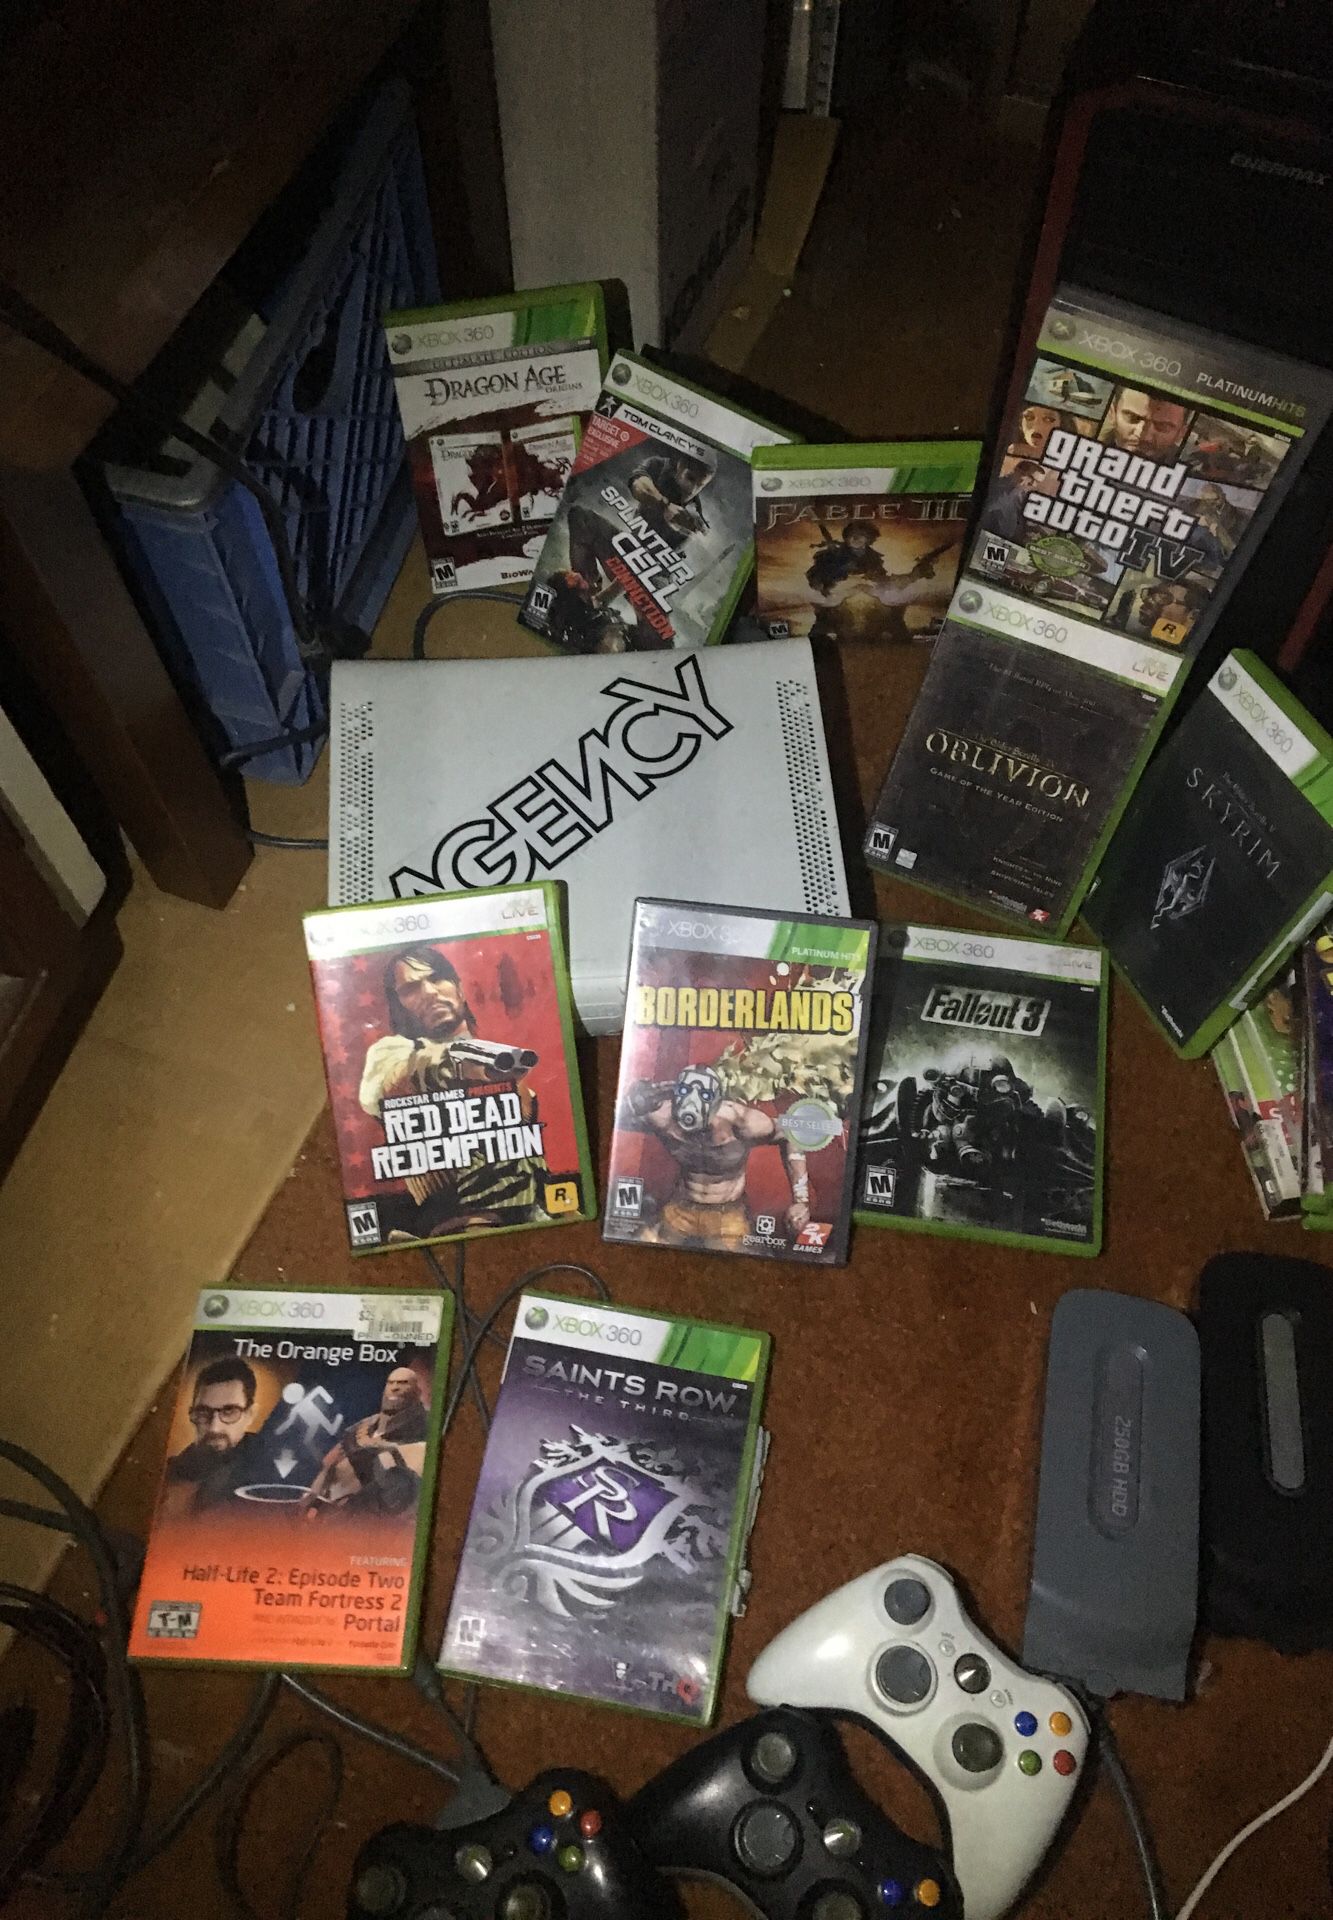 Xbox 360 + 24 games + 3 controllers + 370gb total storage